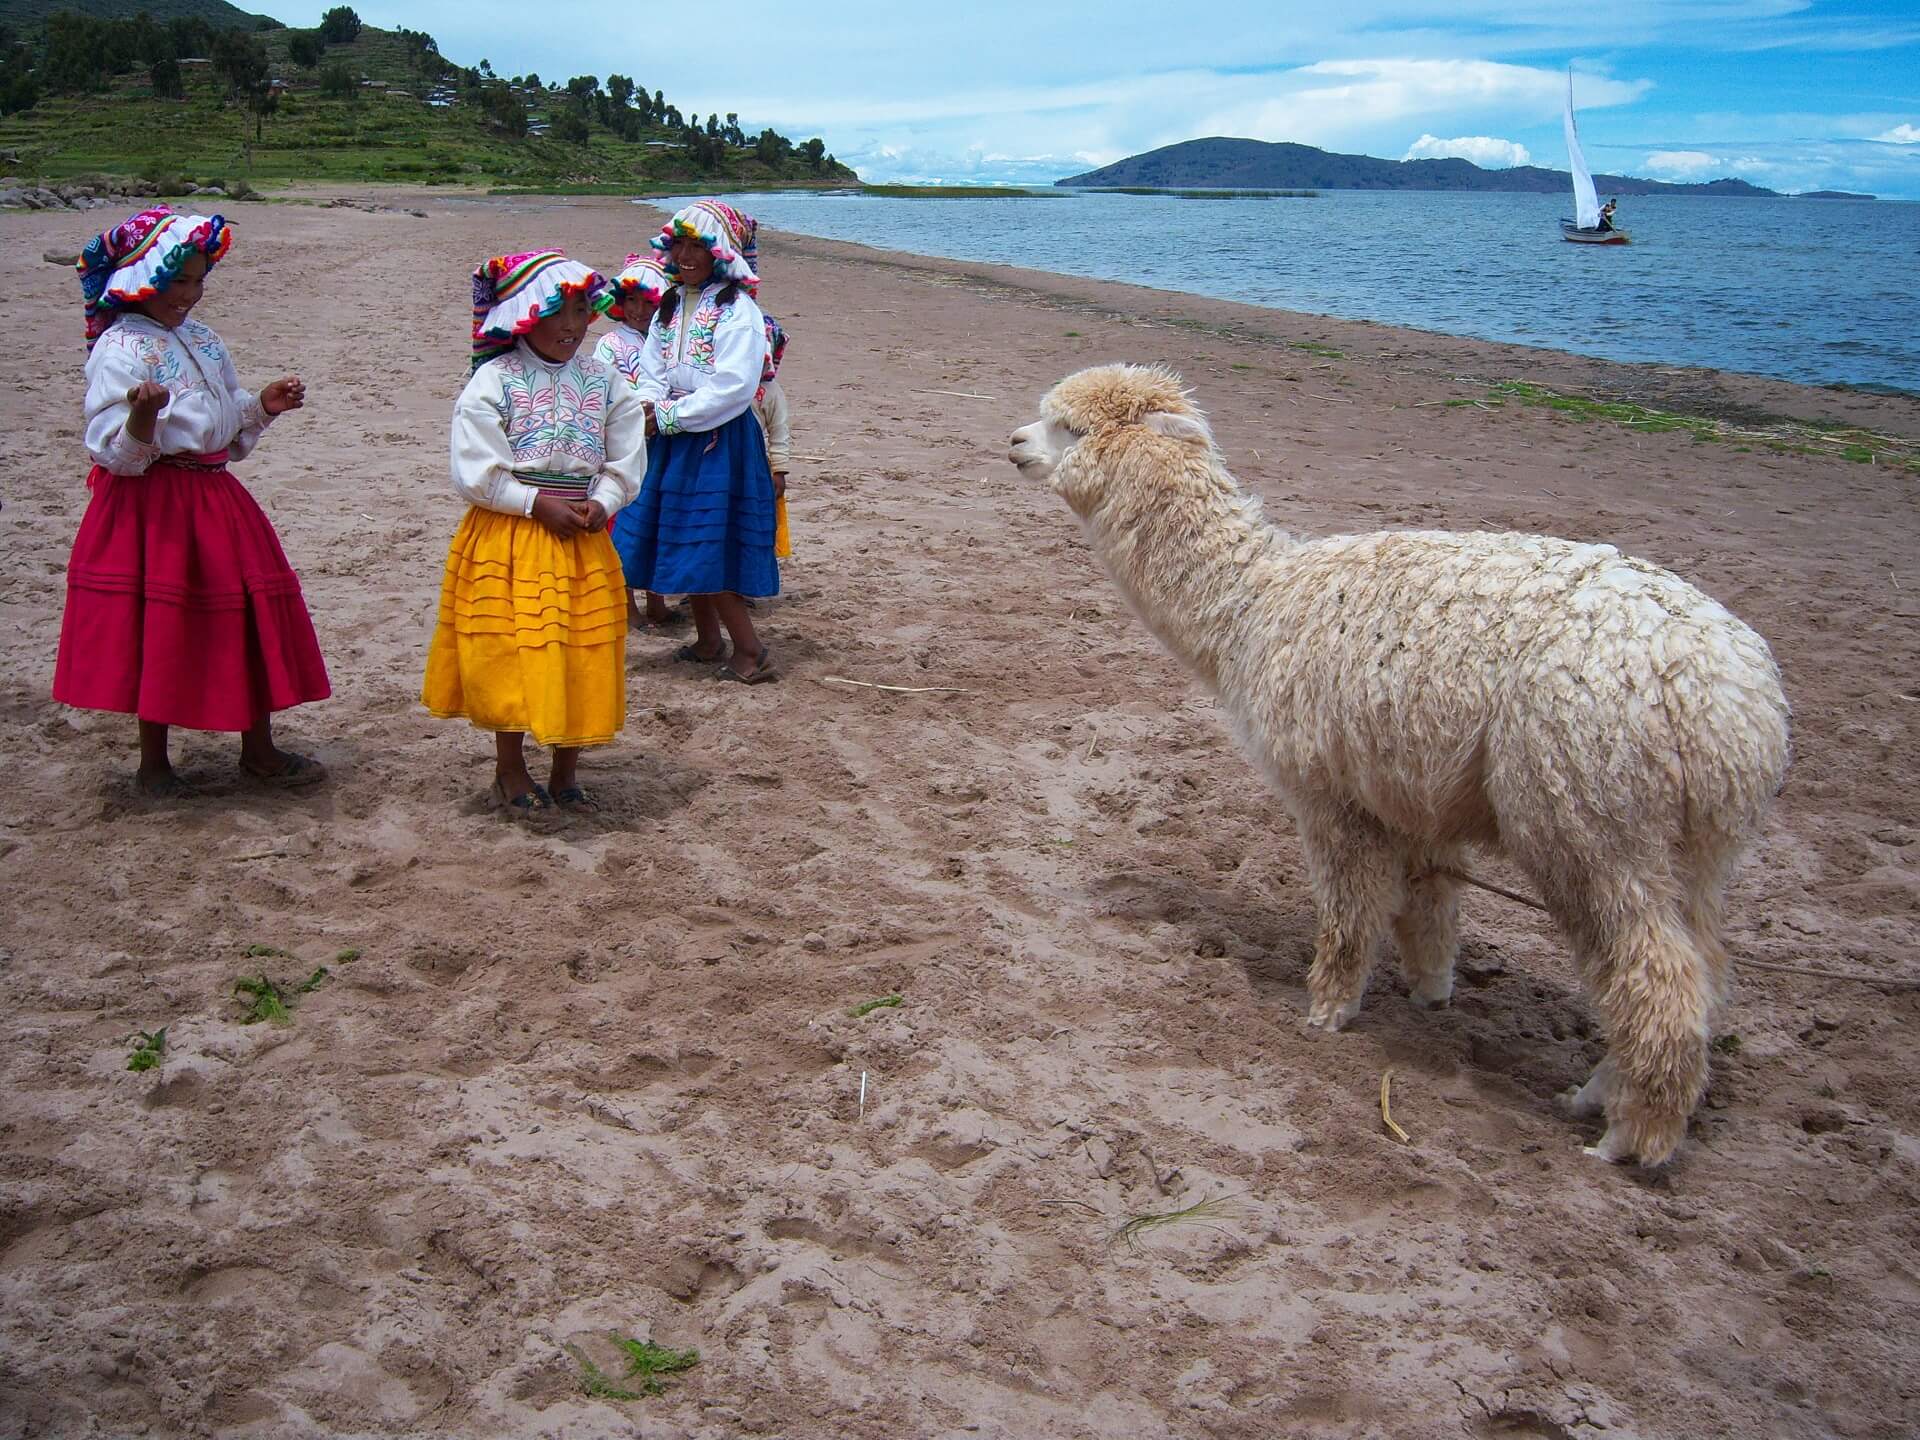 11Traditionally dressed girls from Llachón at the shores of Lake Titicaca with an alpaca and a sailboat. Visit Lake Titicaca in a sustainable fashion and get off the beaten path with RESPONSible Travel Peru.